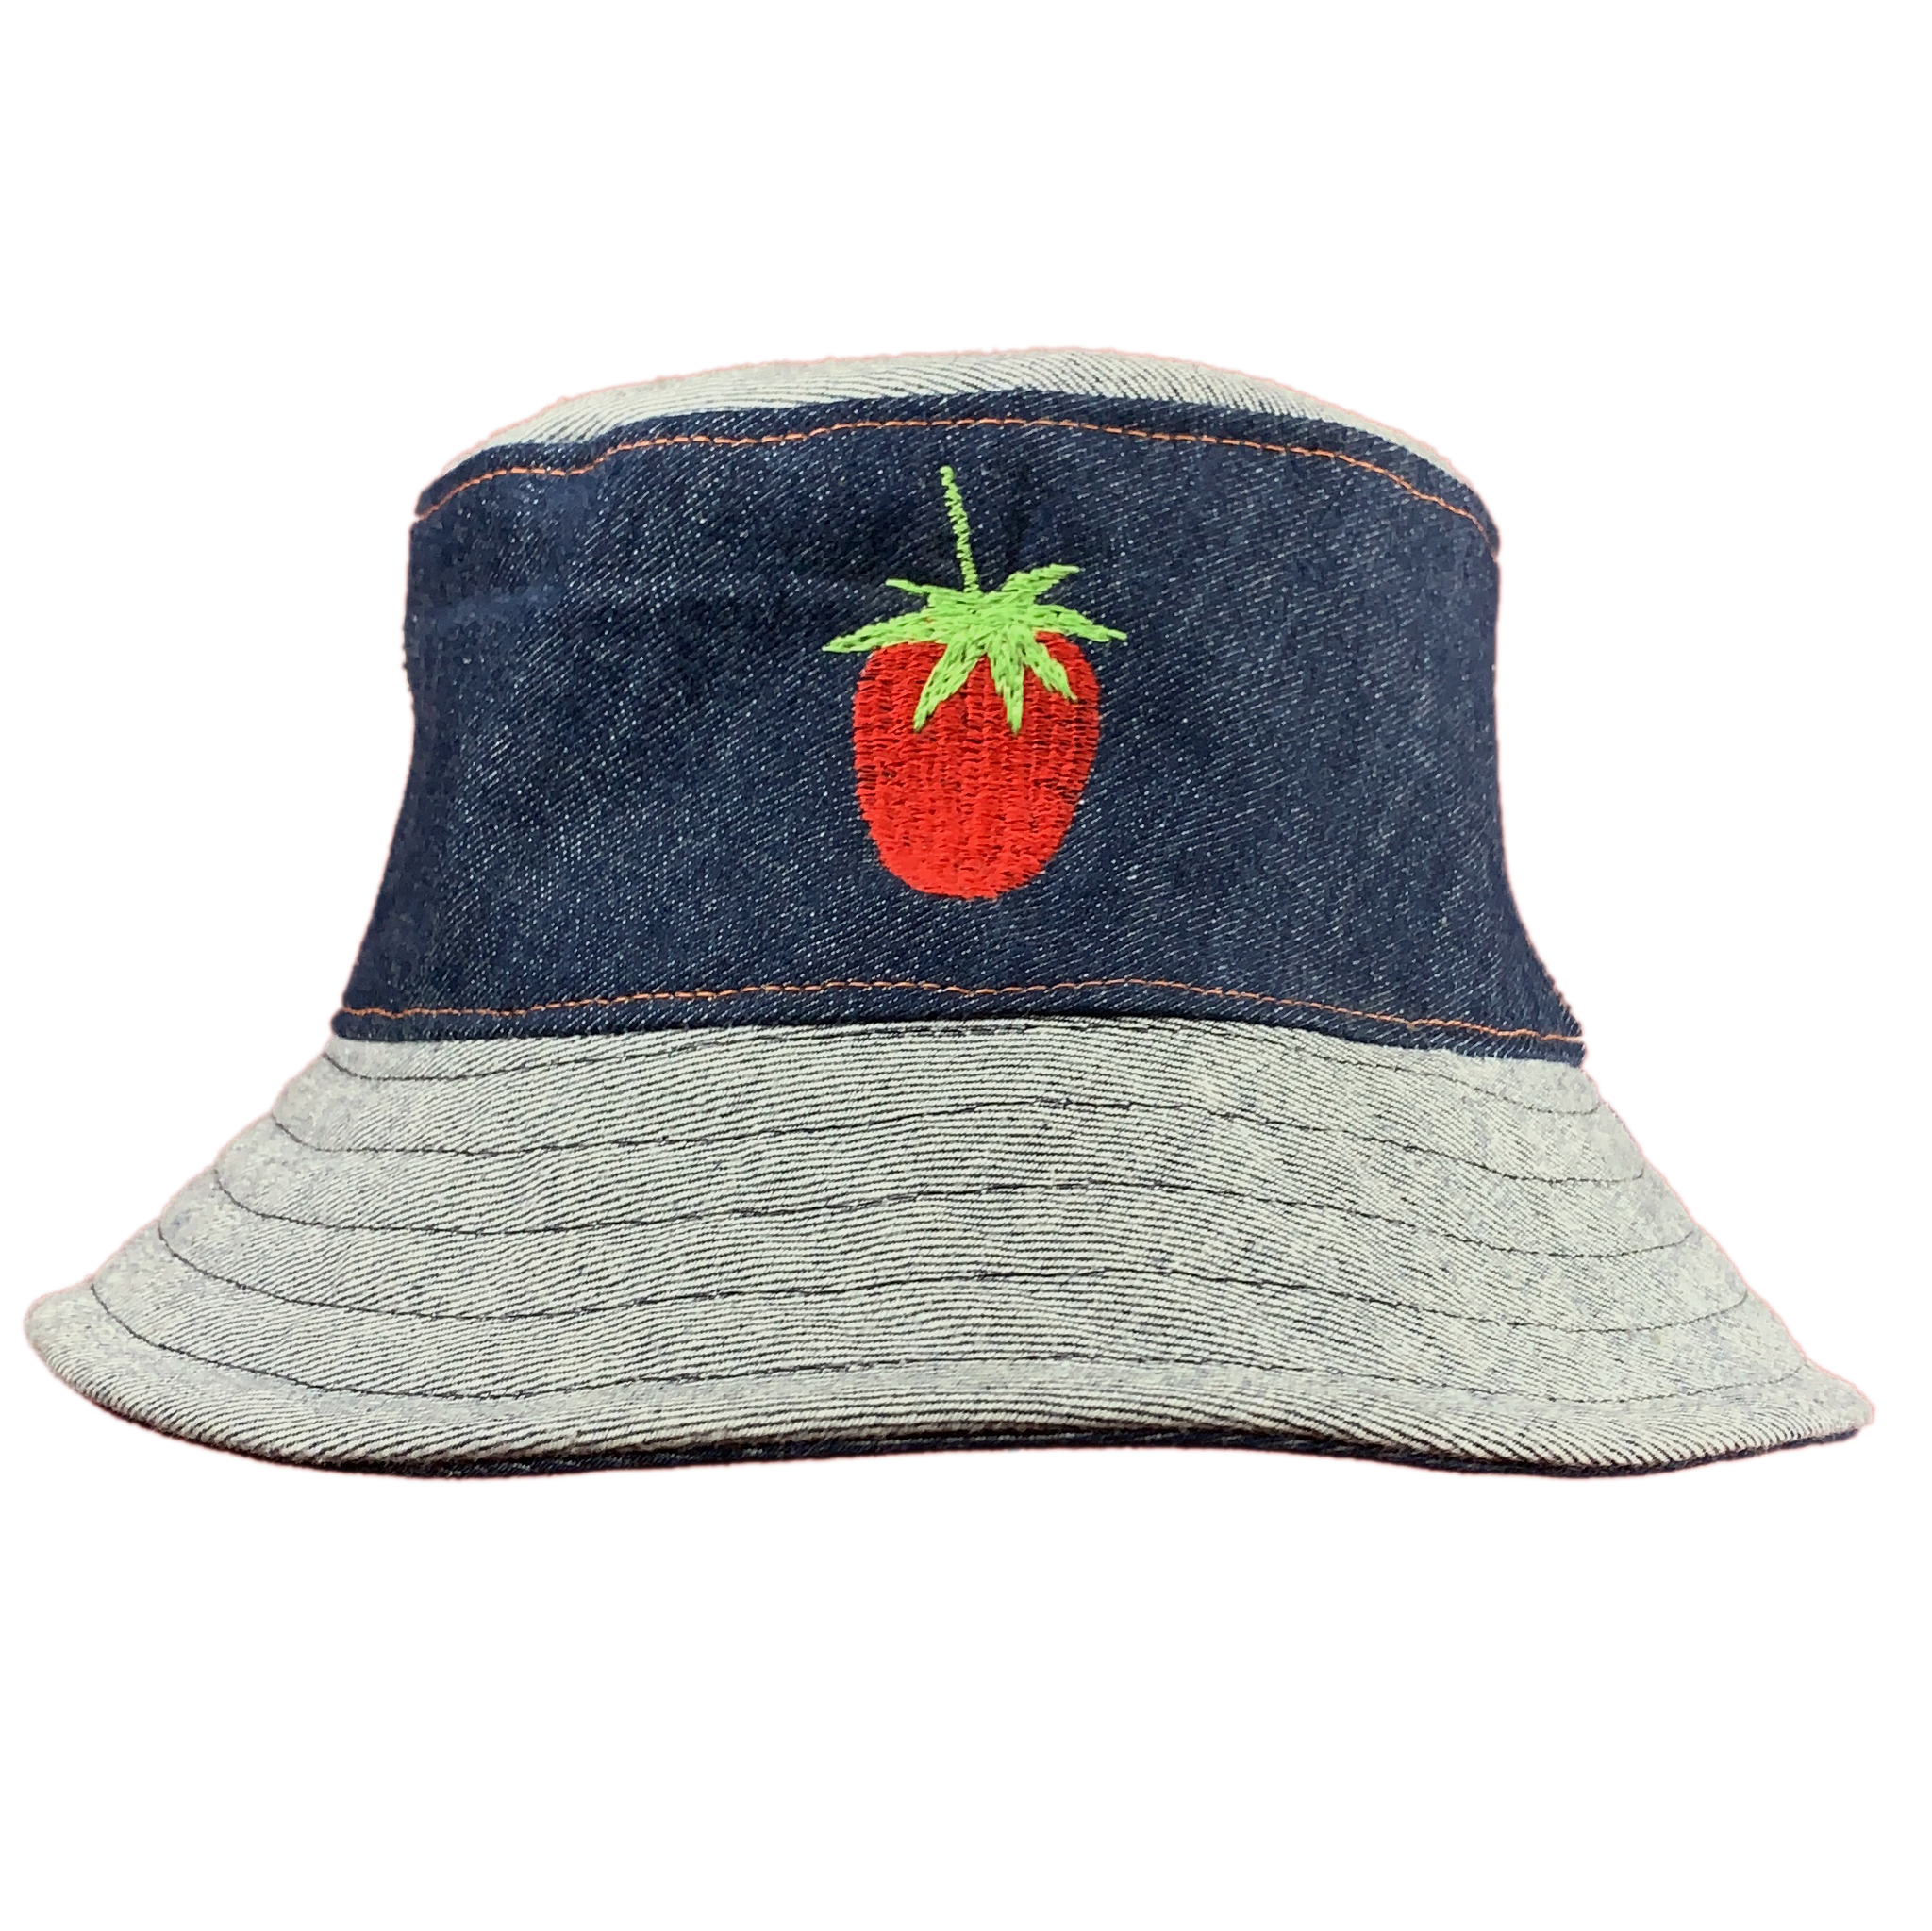 Handmade Embroidered Bucket Hat - Large